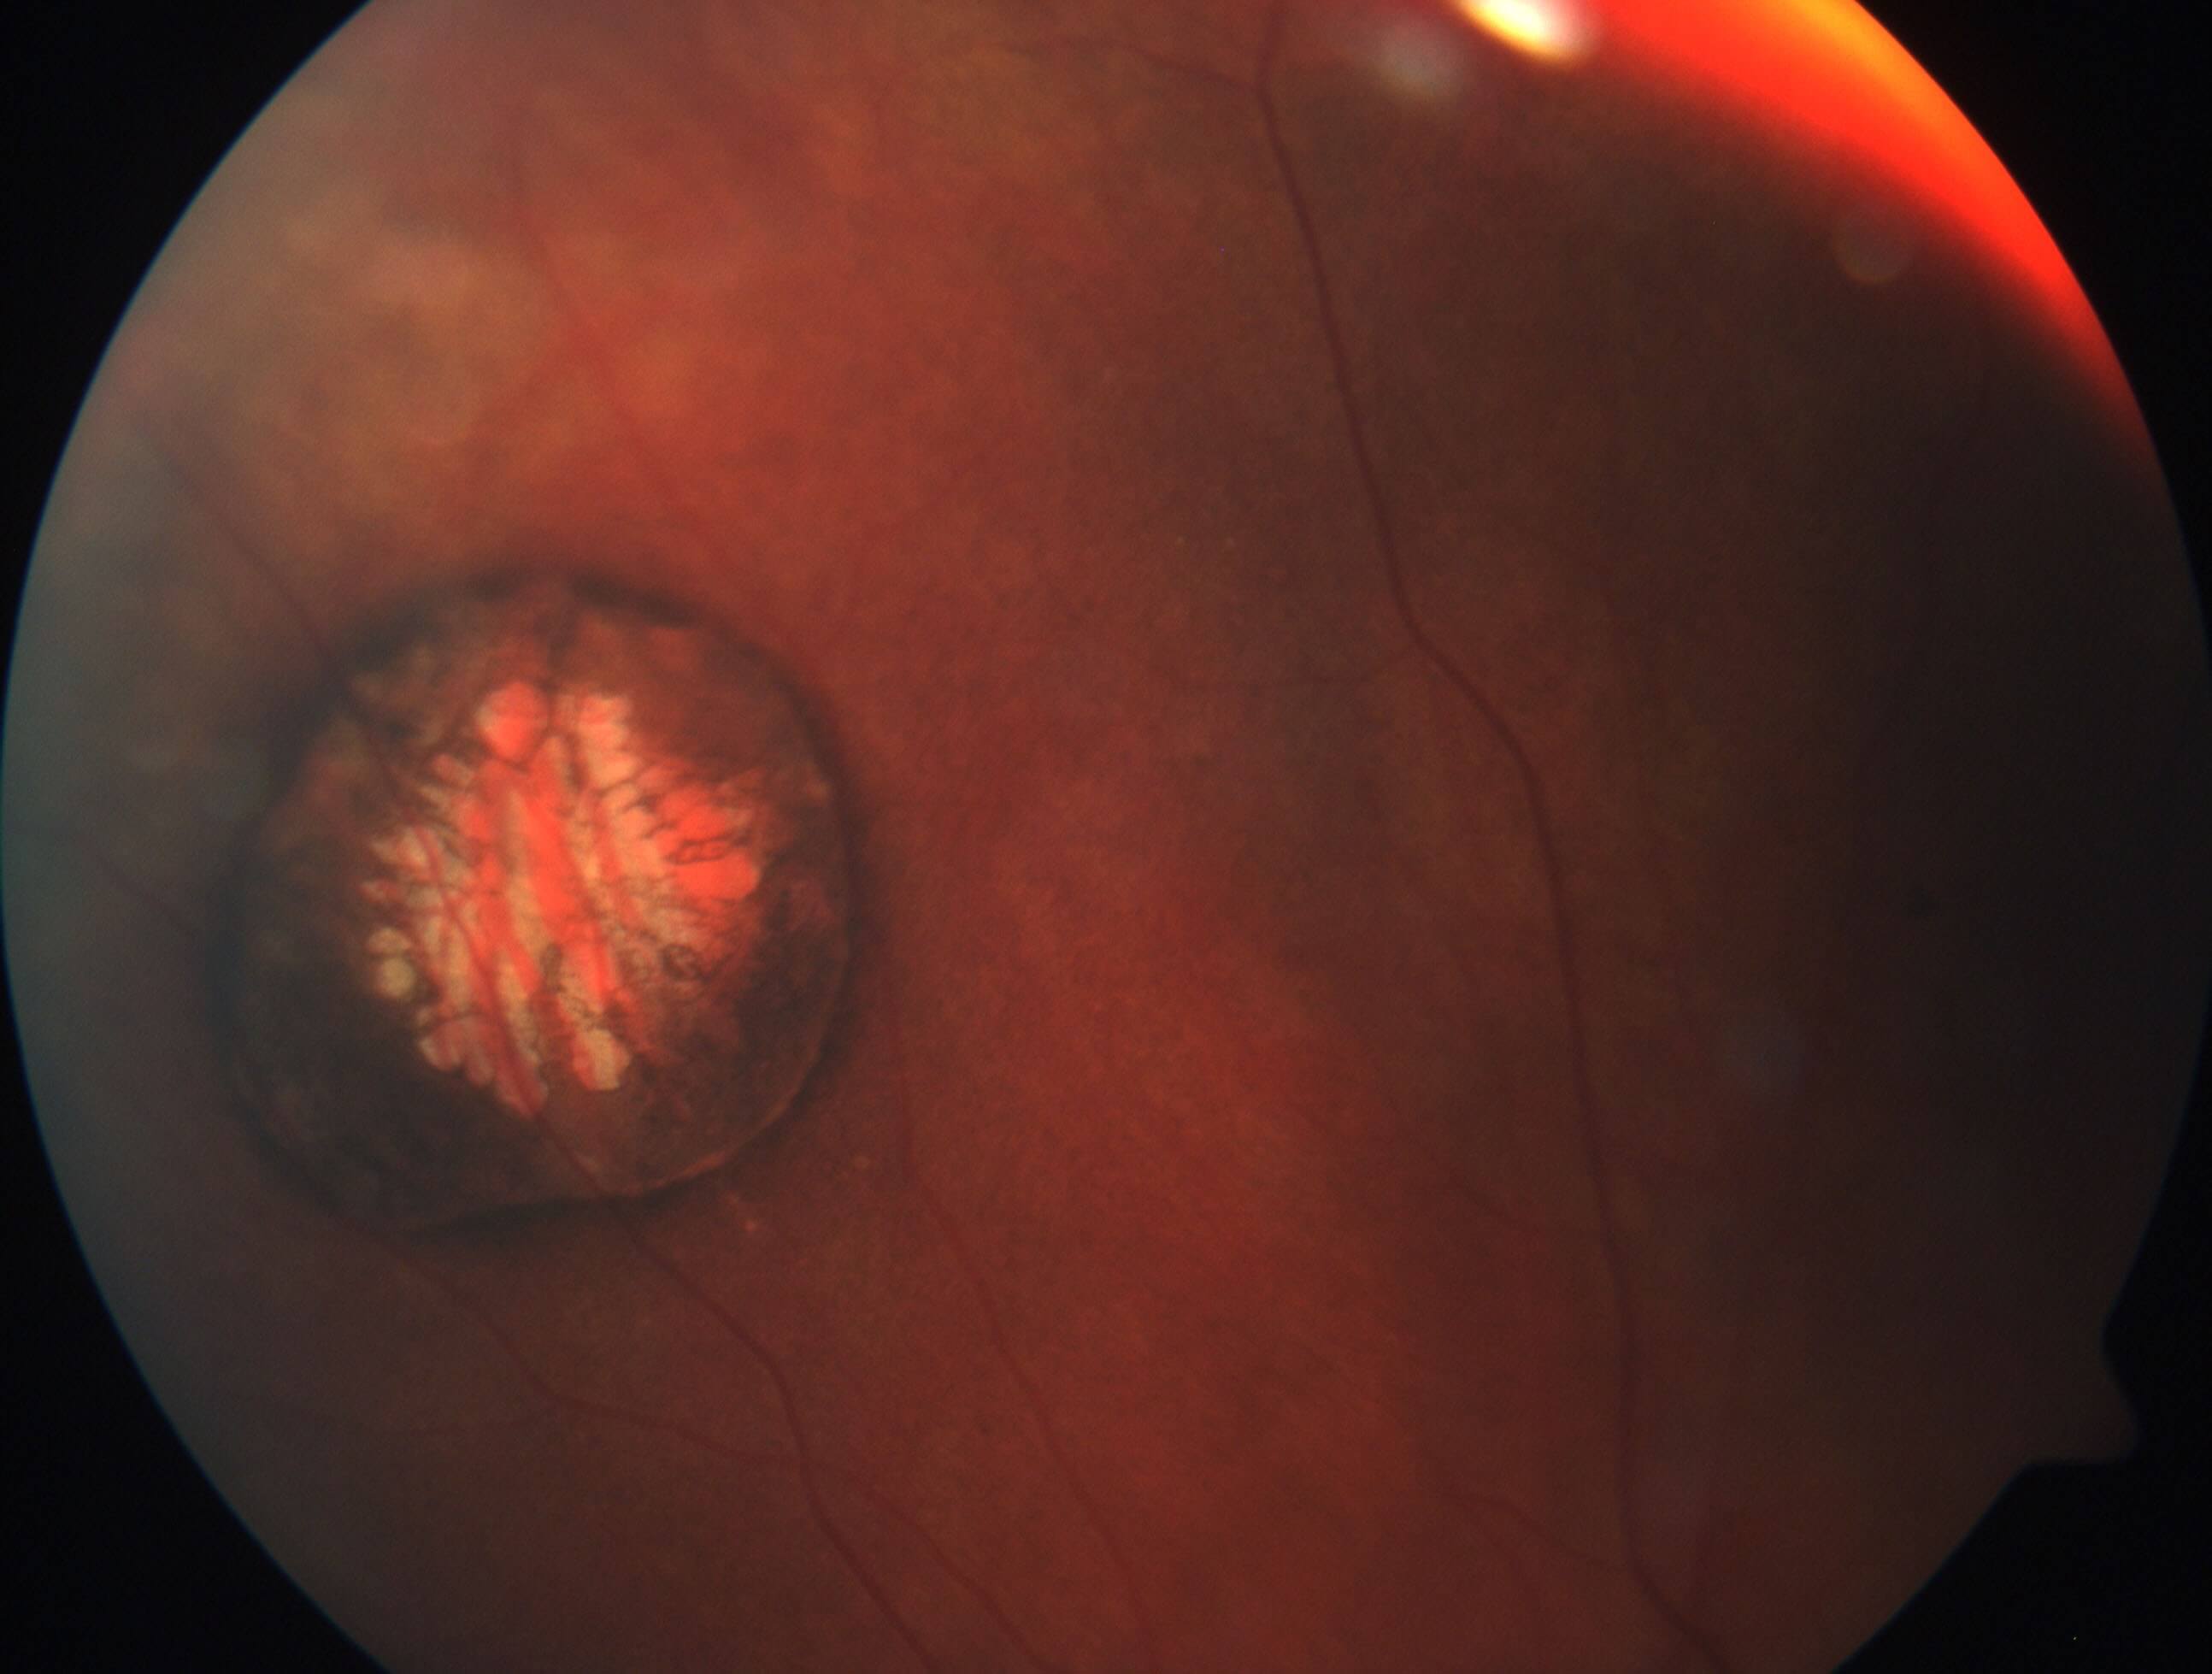 Colour fundus photograph of a congenital hypertrophy of the retinal pigment epithelium lesion with central pale lacunae where the retinal pigment epithelium is absent.